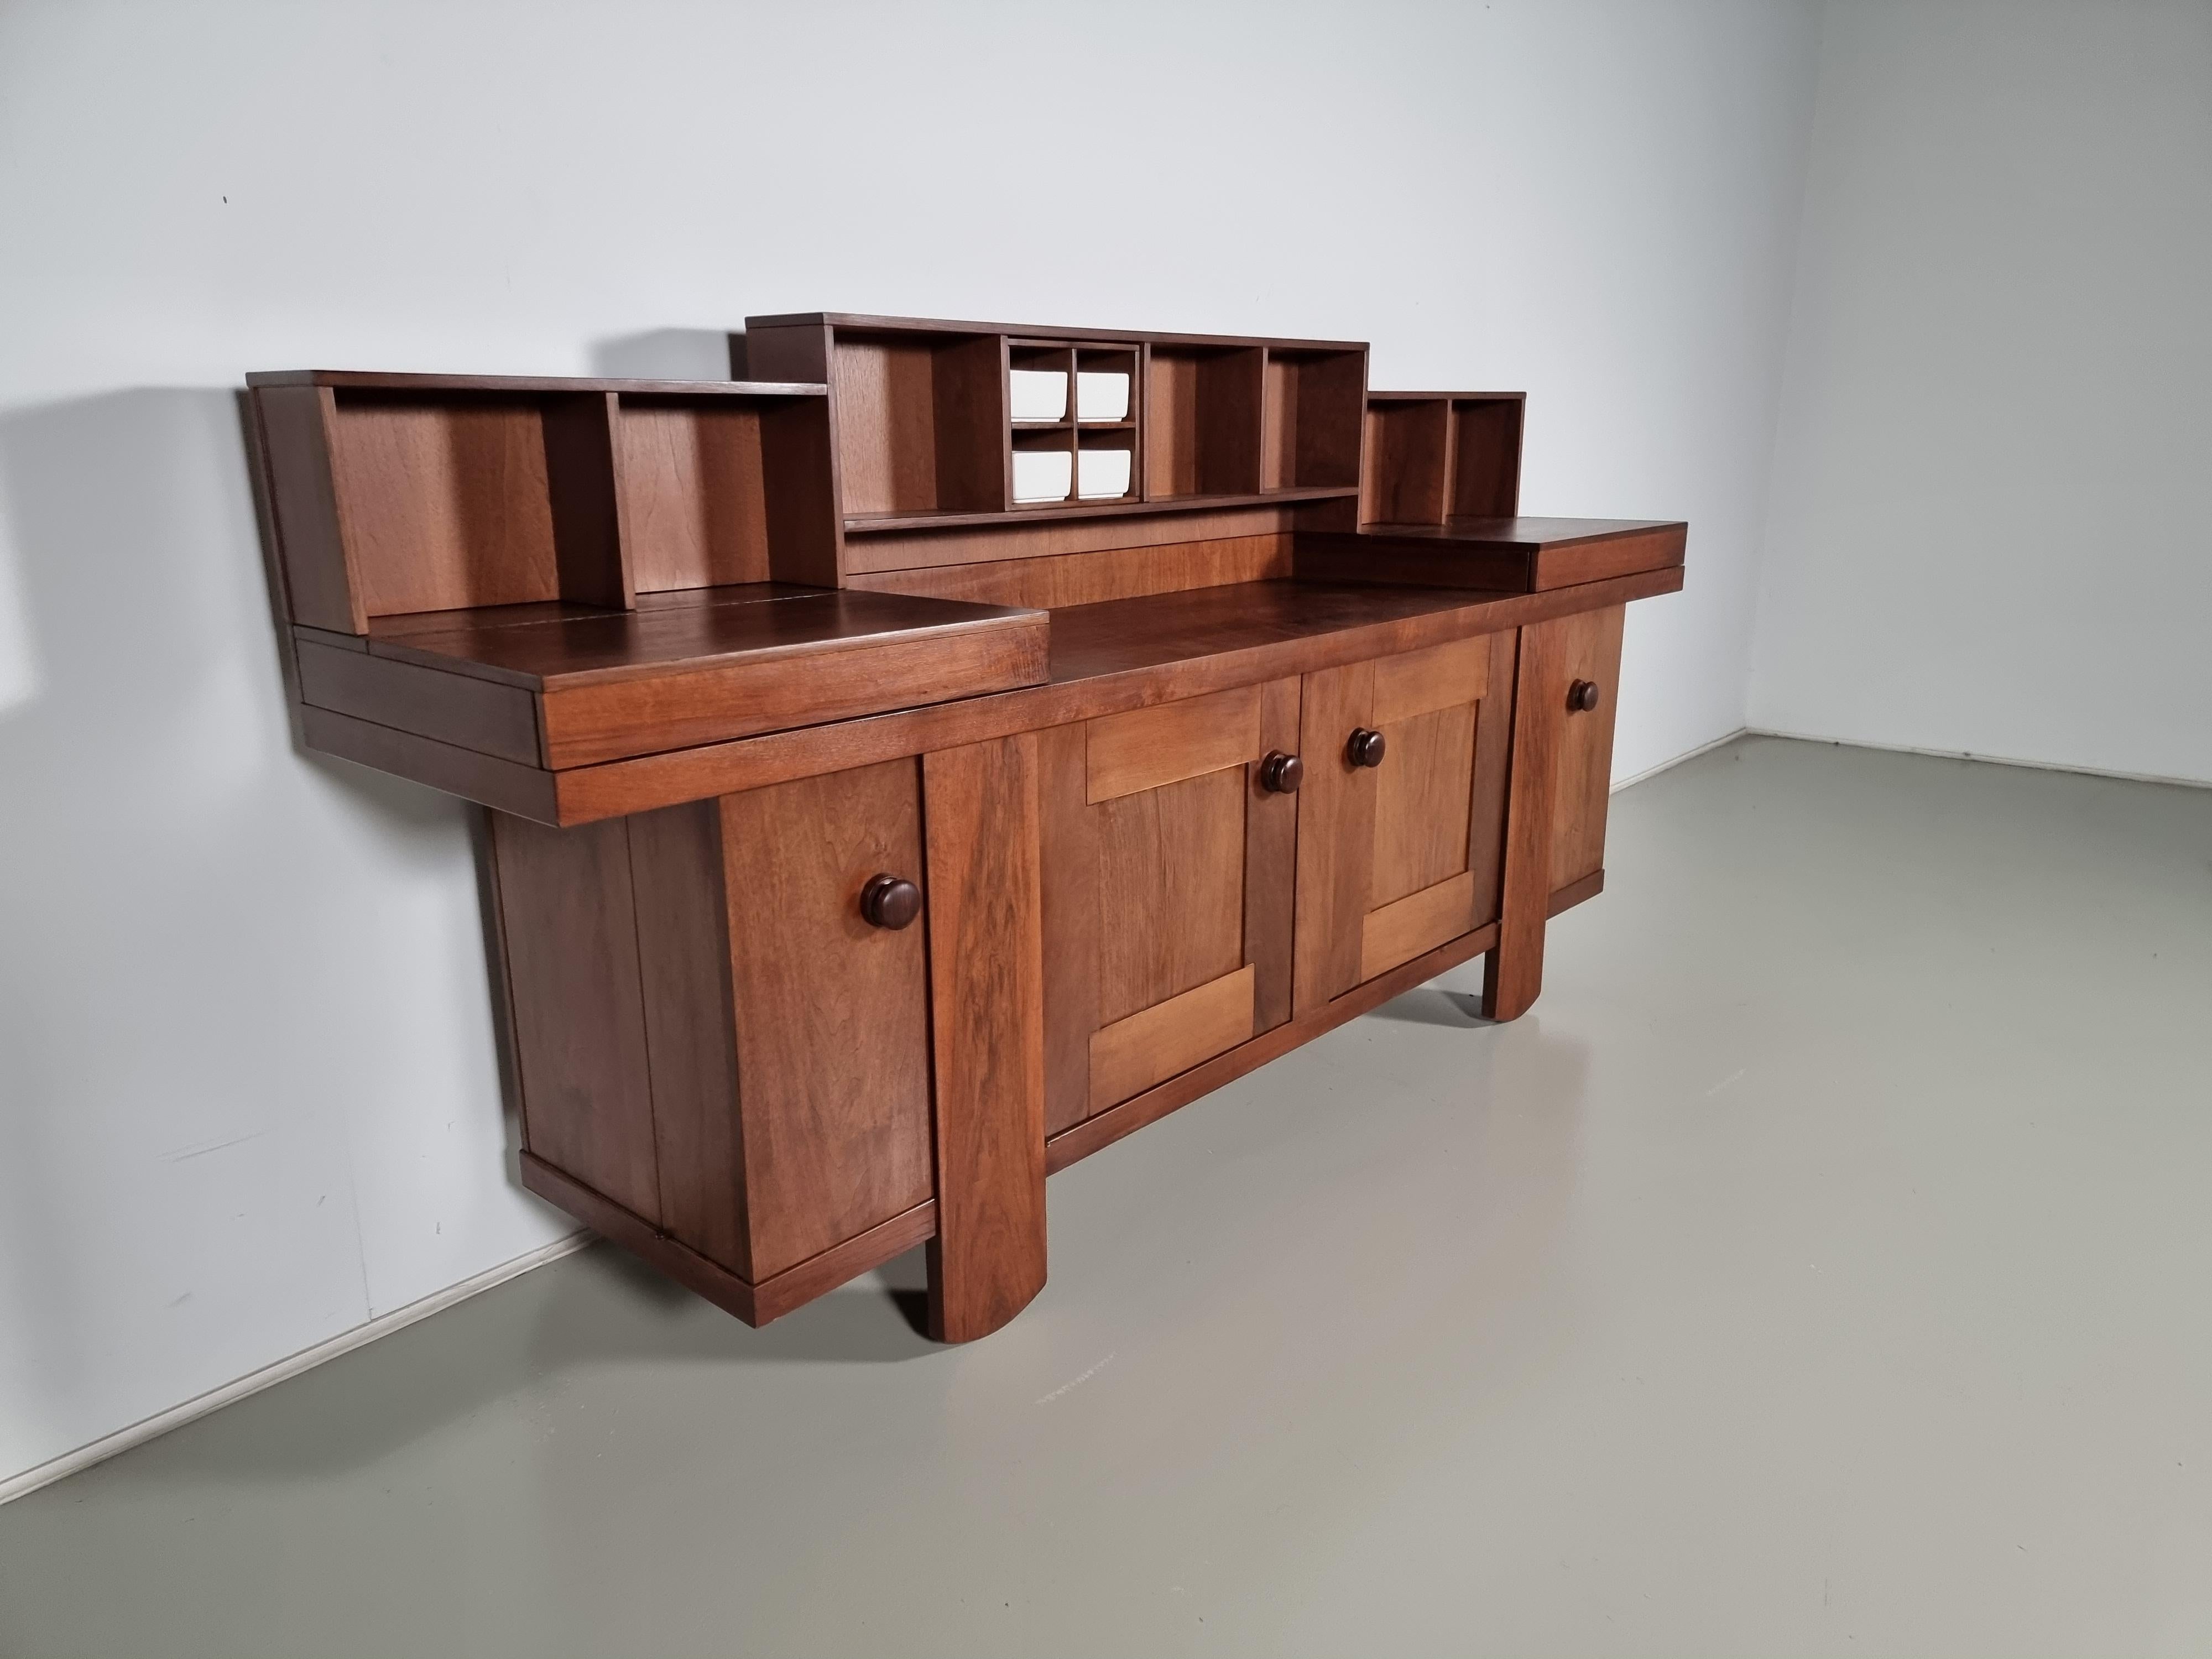 Wonderful sideboard designed by Silvio Coppola for Bernini in 1968. The structure is in walnut wood and has eight compartments of the same size, a compartment for porcelain vases, two lined trays with drop-down doors, two central doors, two corner